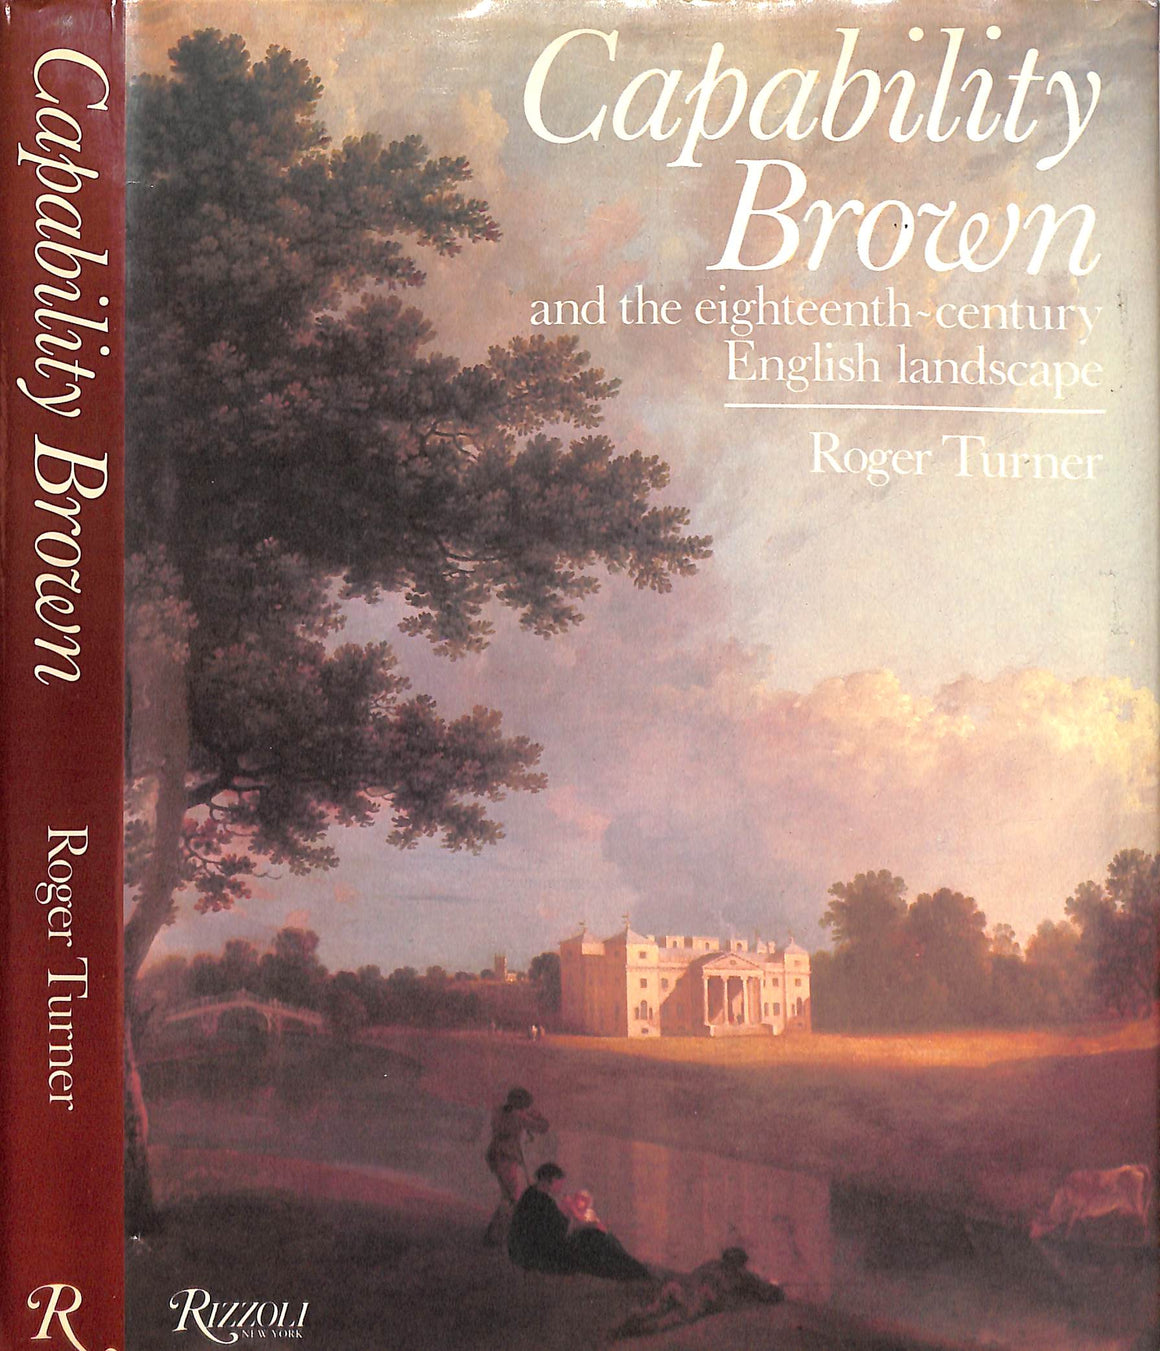 "Capability Brown And The Eighteenth-Century English Landscape" 1985 TURNER, Roger